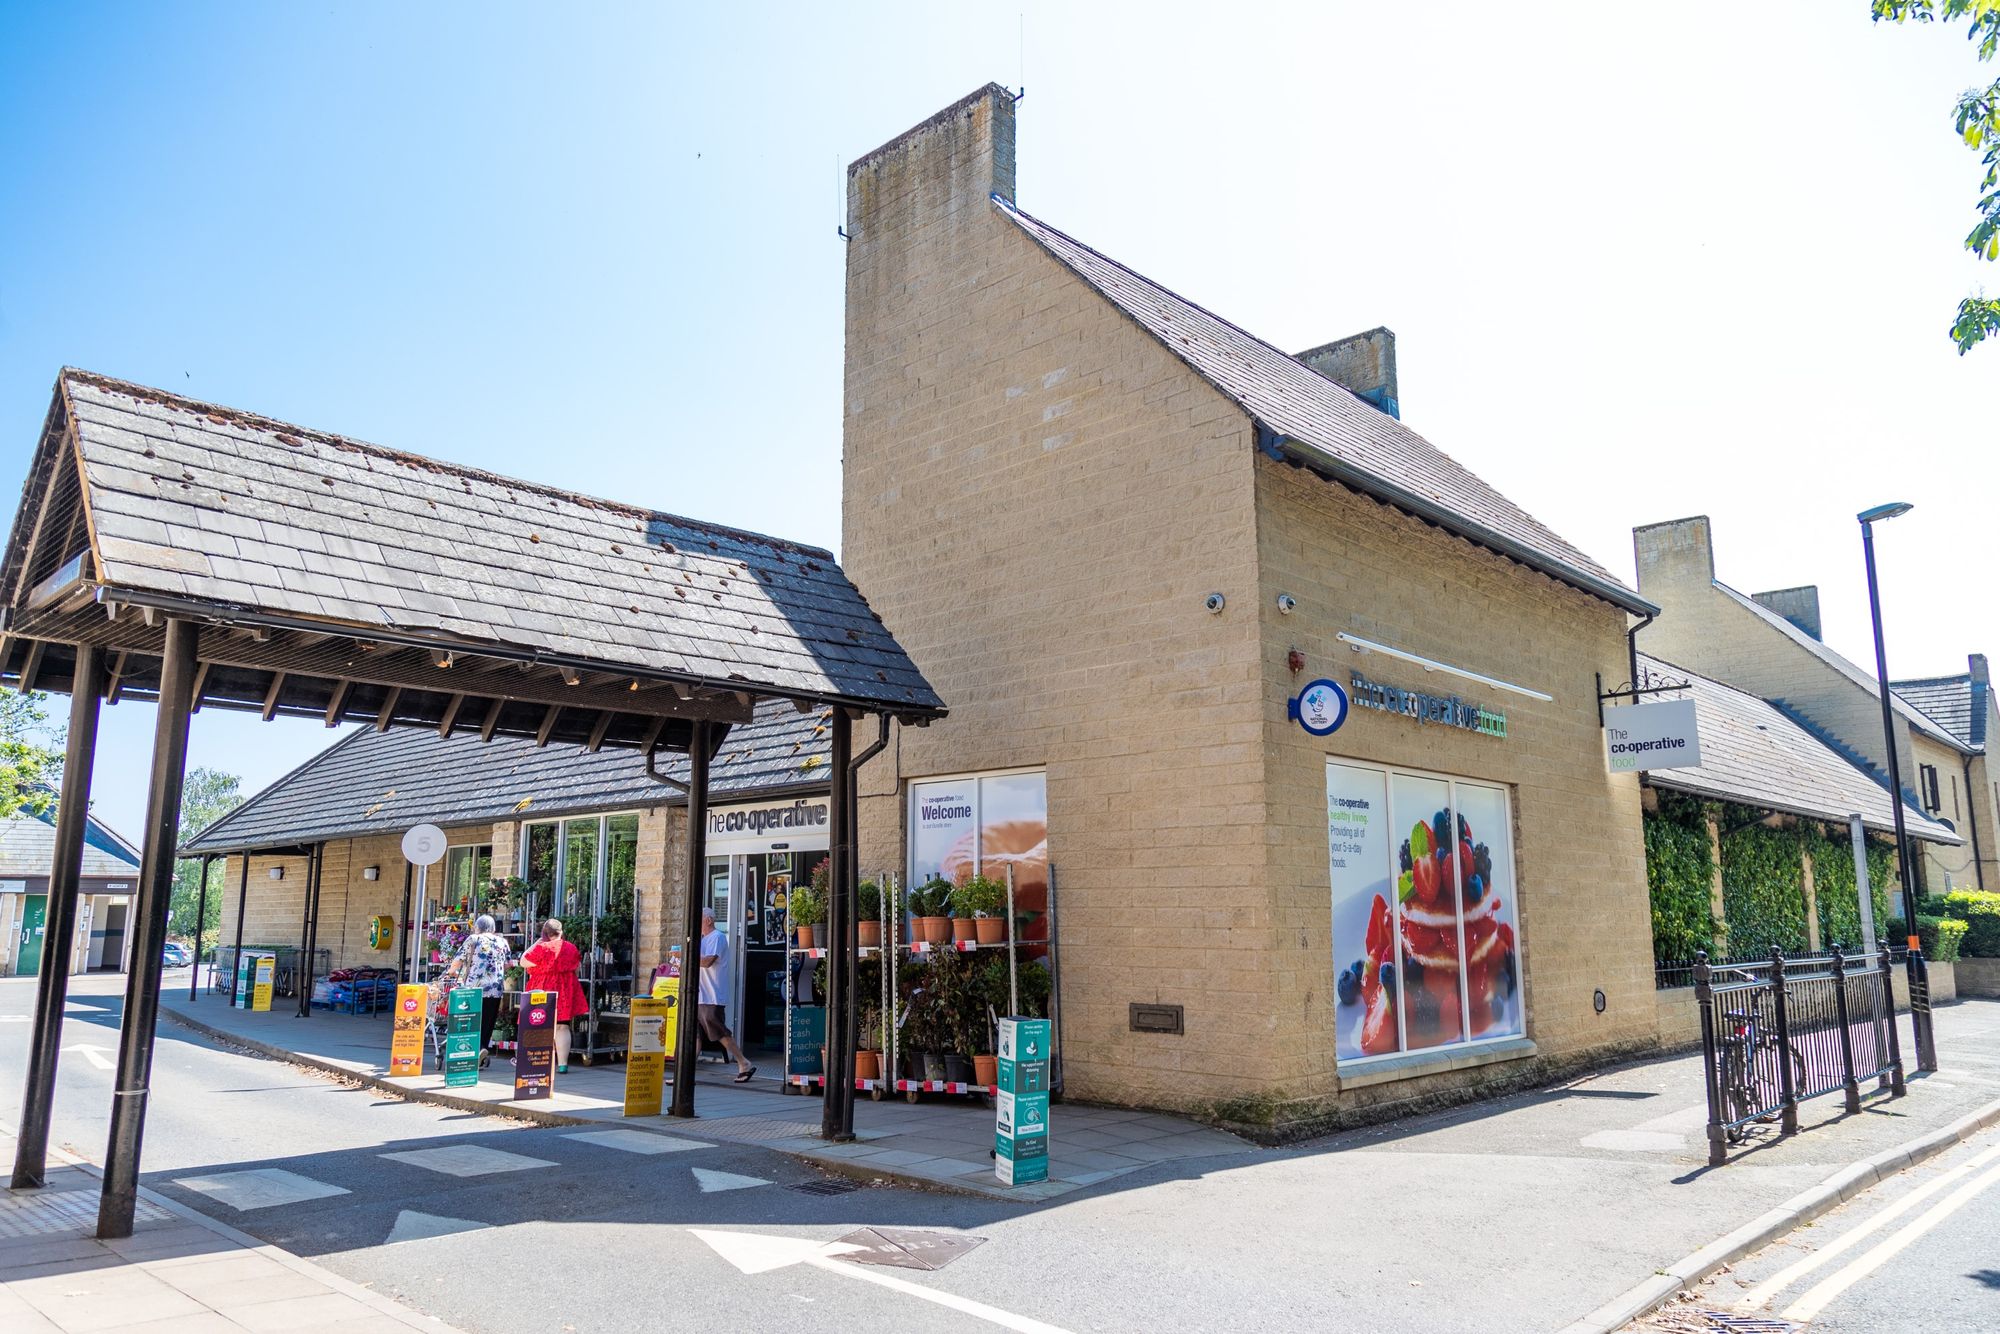 Second Northants store this year receiving major investment to create a completely new look